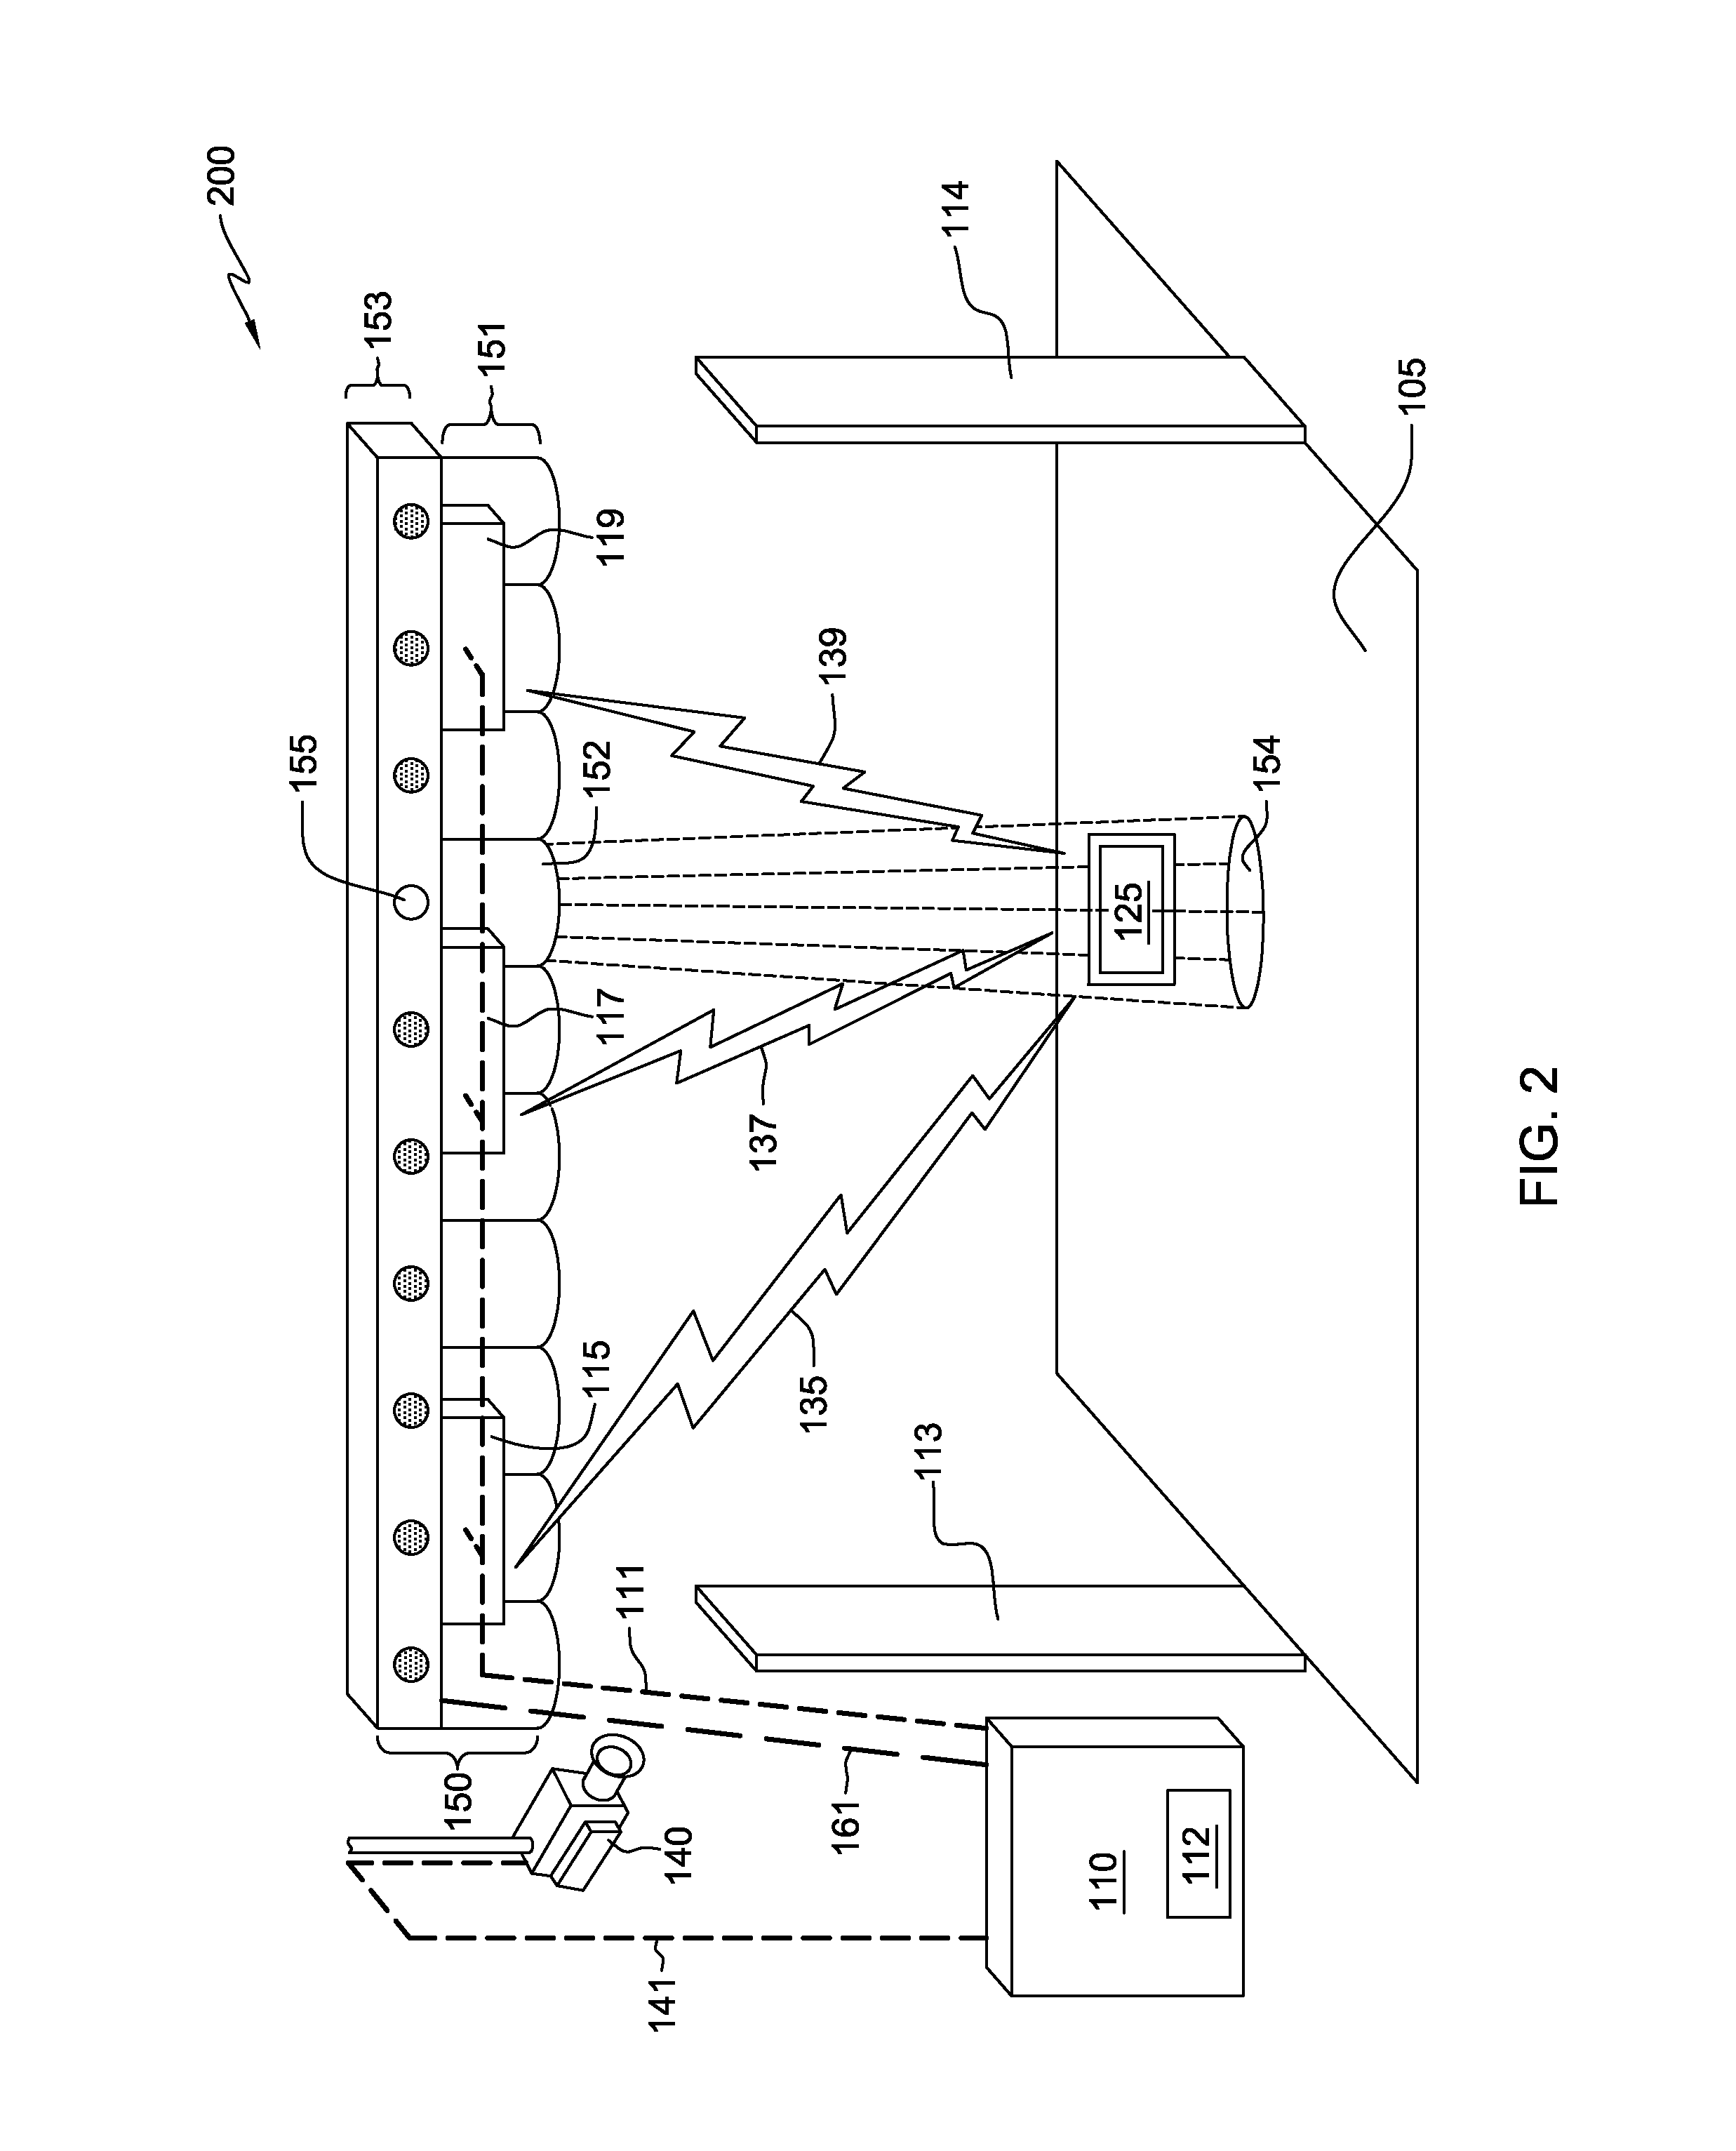 Apparatus for indicating the location of a signal emitting tag